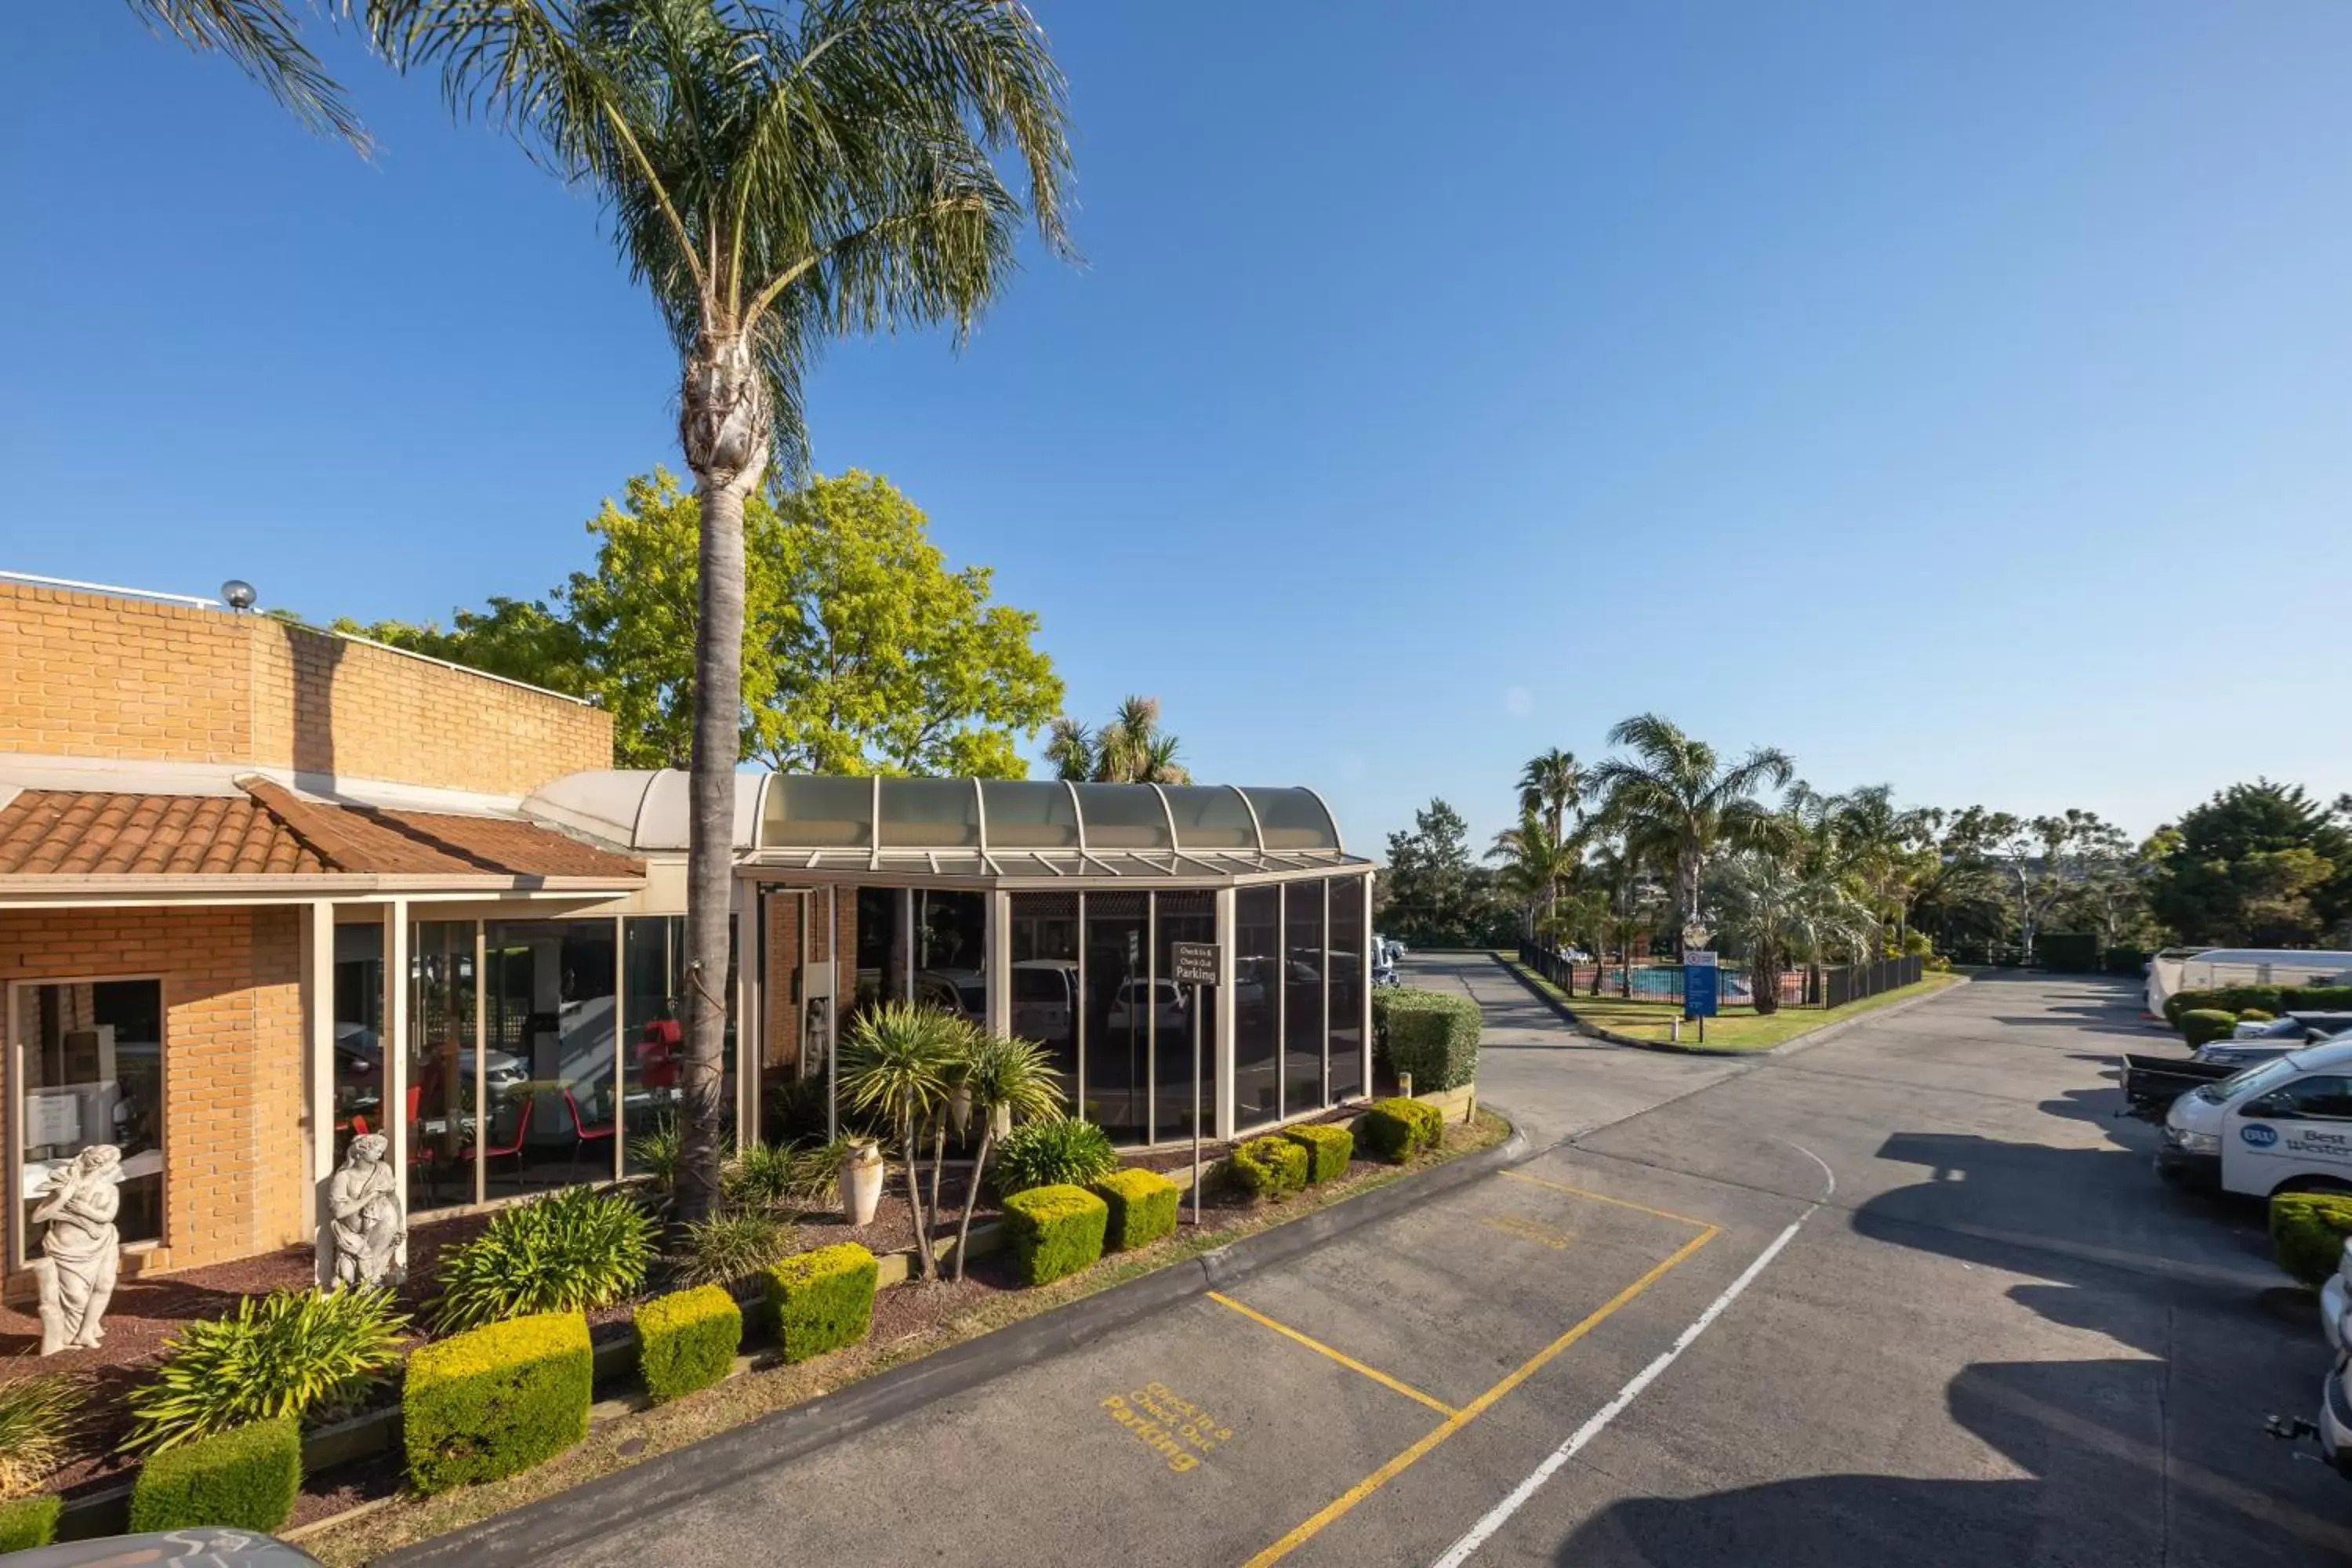 Property building in Best Western Melbourne Airport